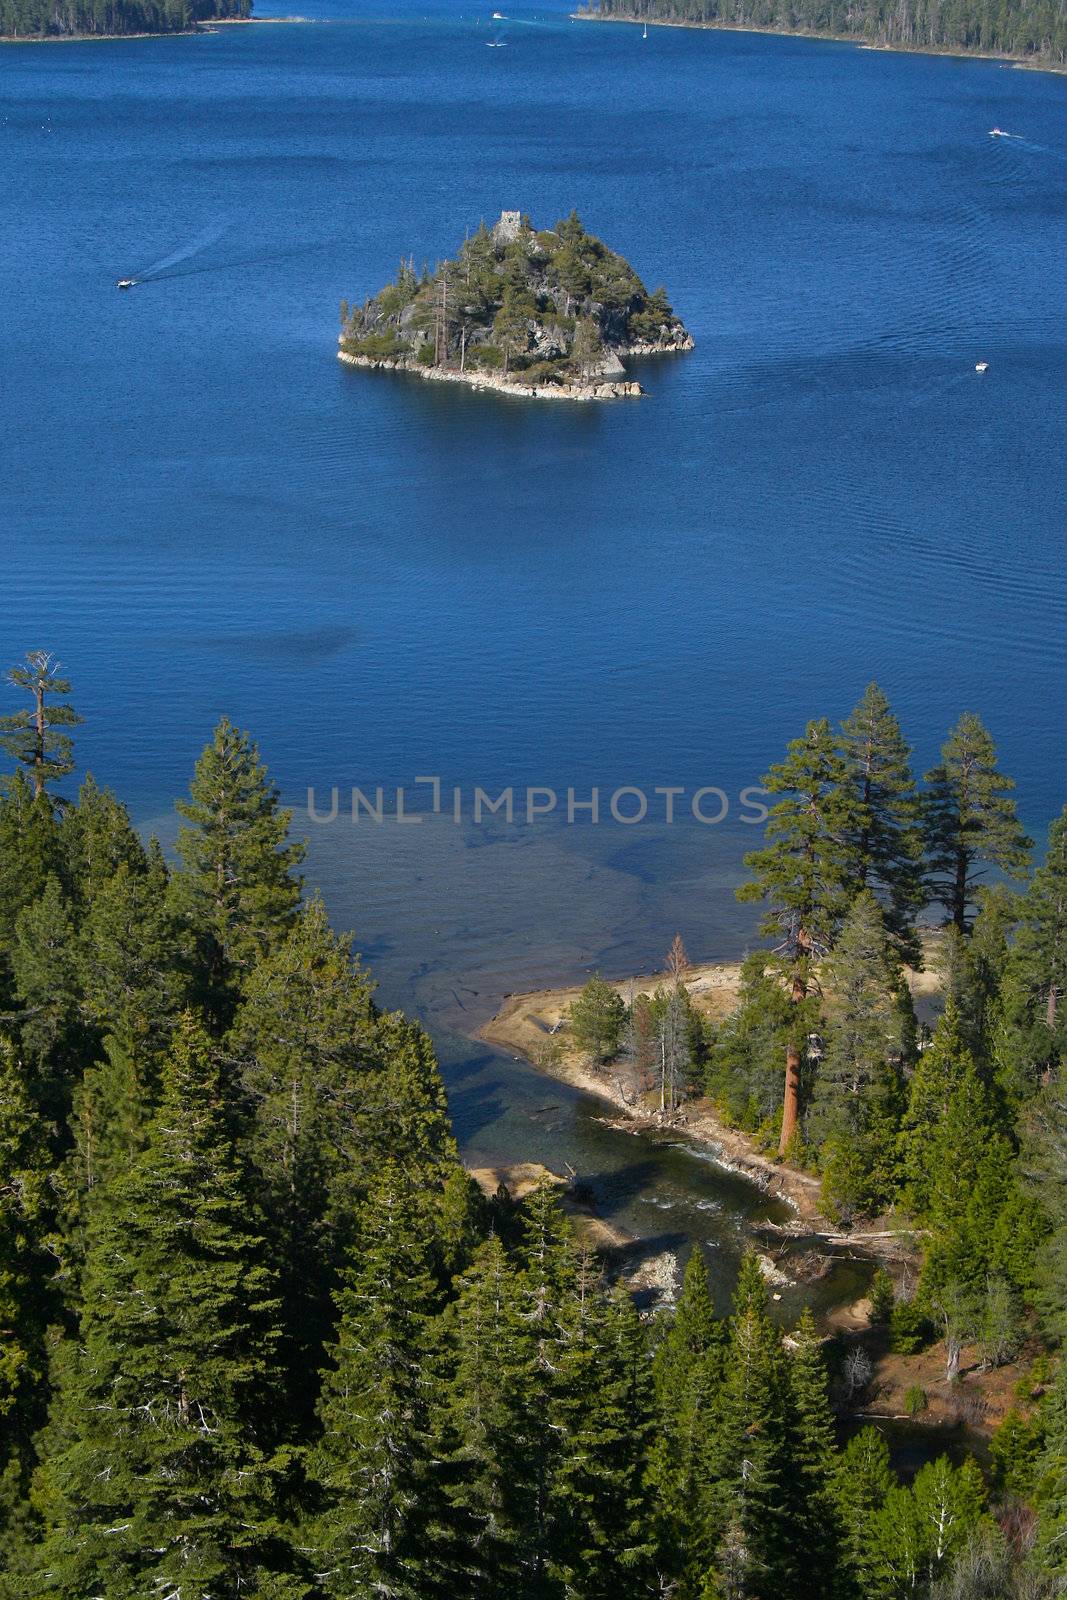 This is beautiful Emerald Bay in Lake Tahoe, California one summer day with Fannette Island in the middle.